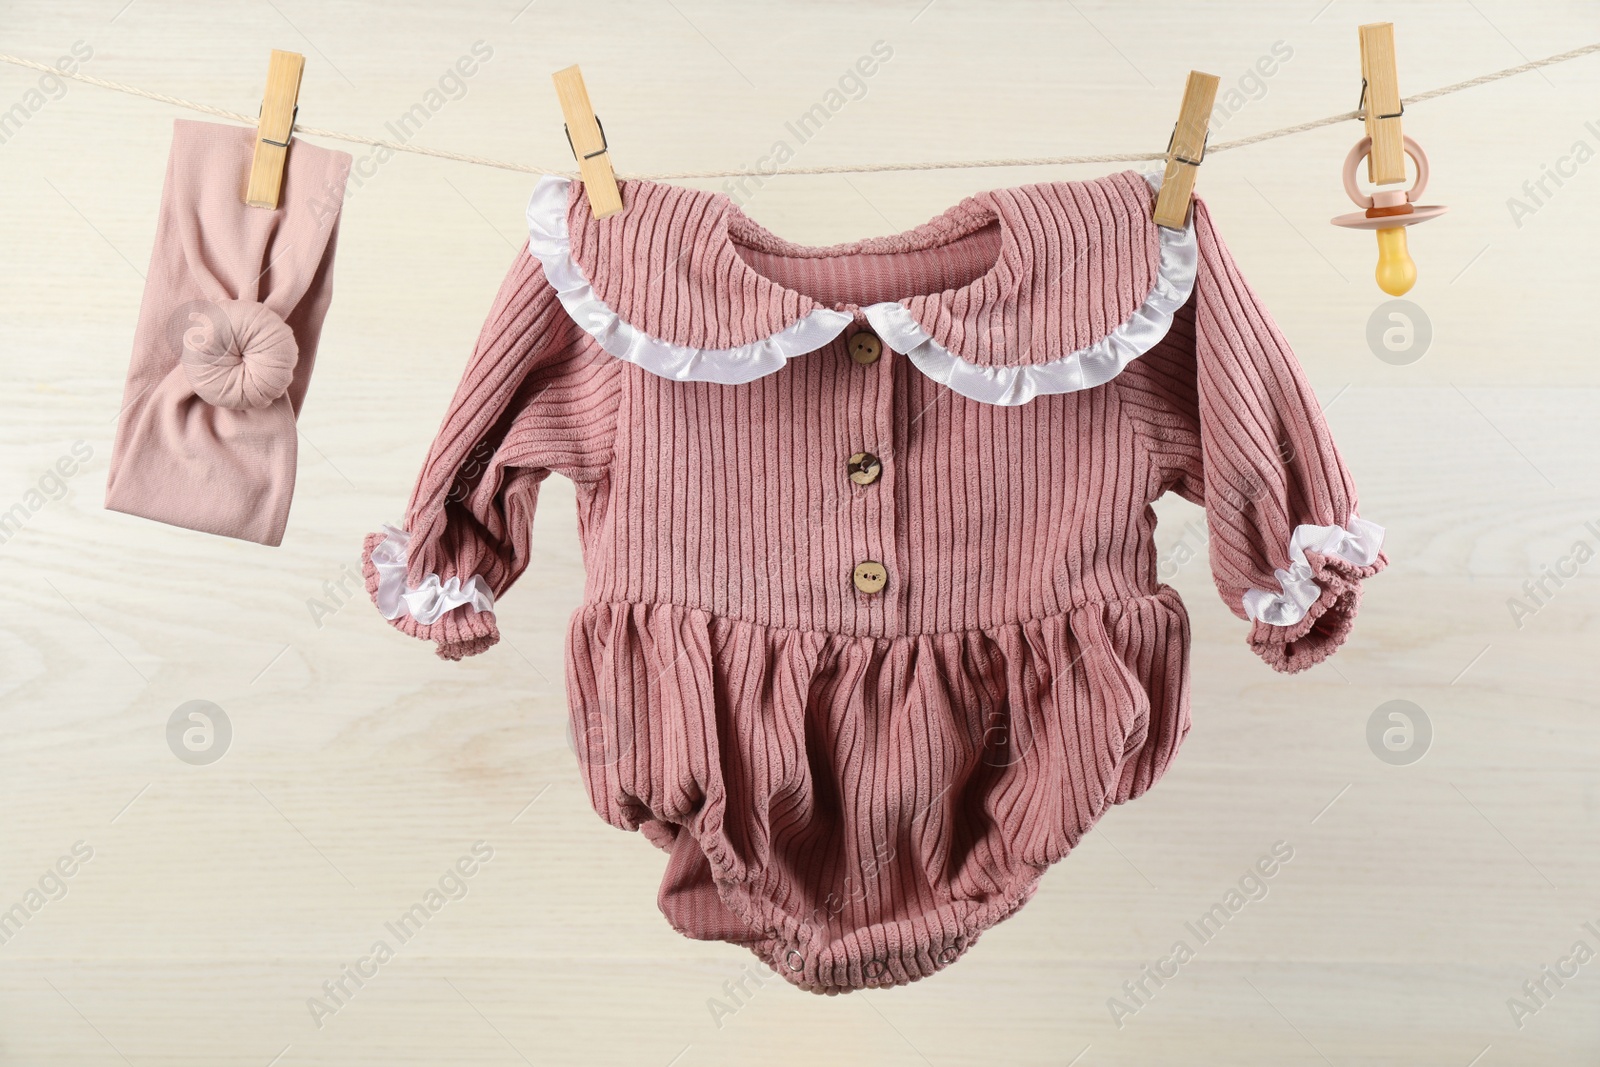 Photo of Baby clothes and accessories hanging on washing line near white wooden wall